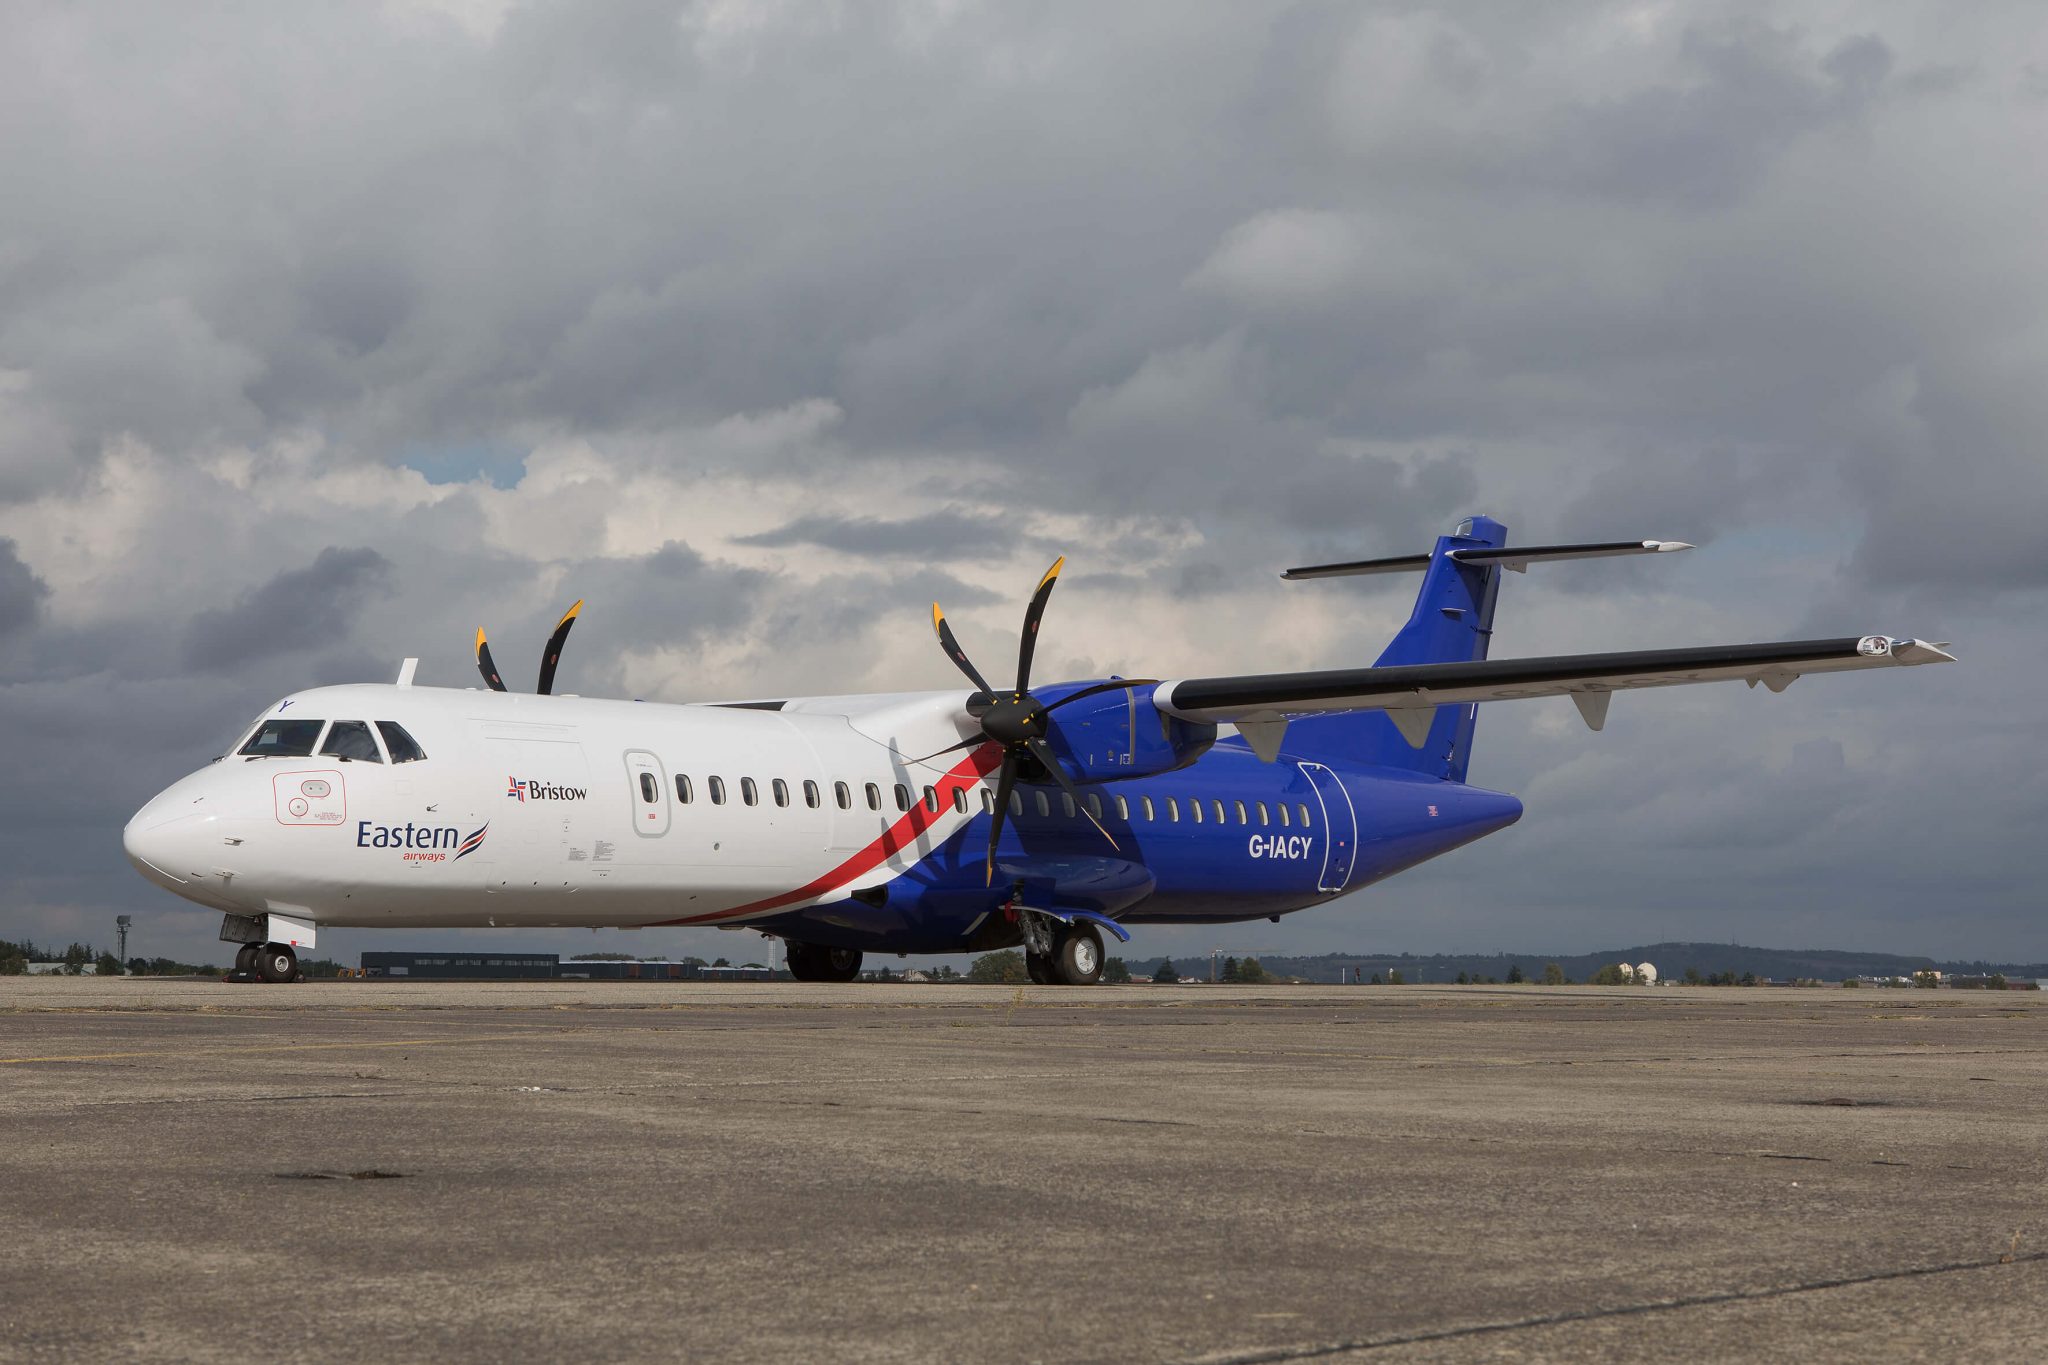 Eastern Airways’ first Cardiff-Paris Orly flight lifts off